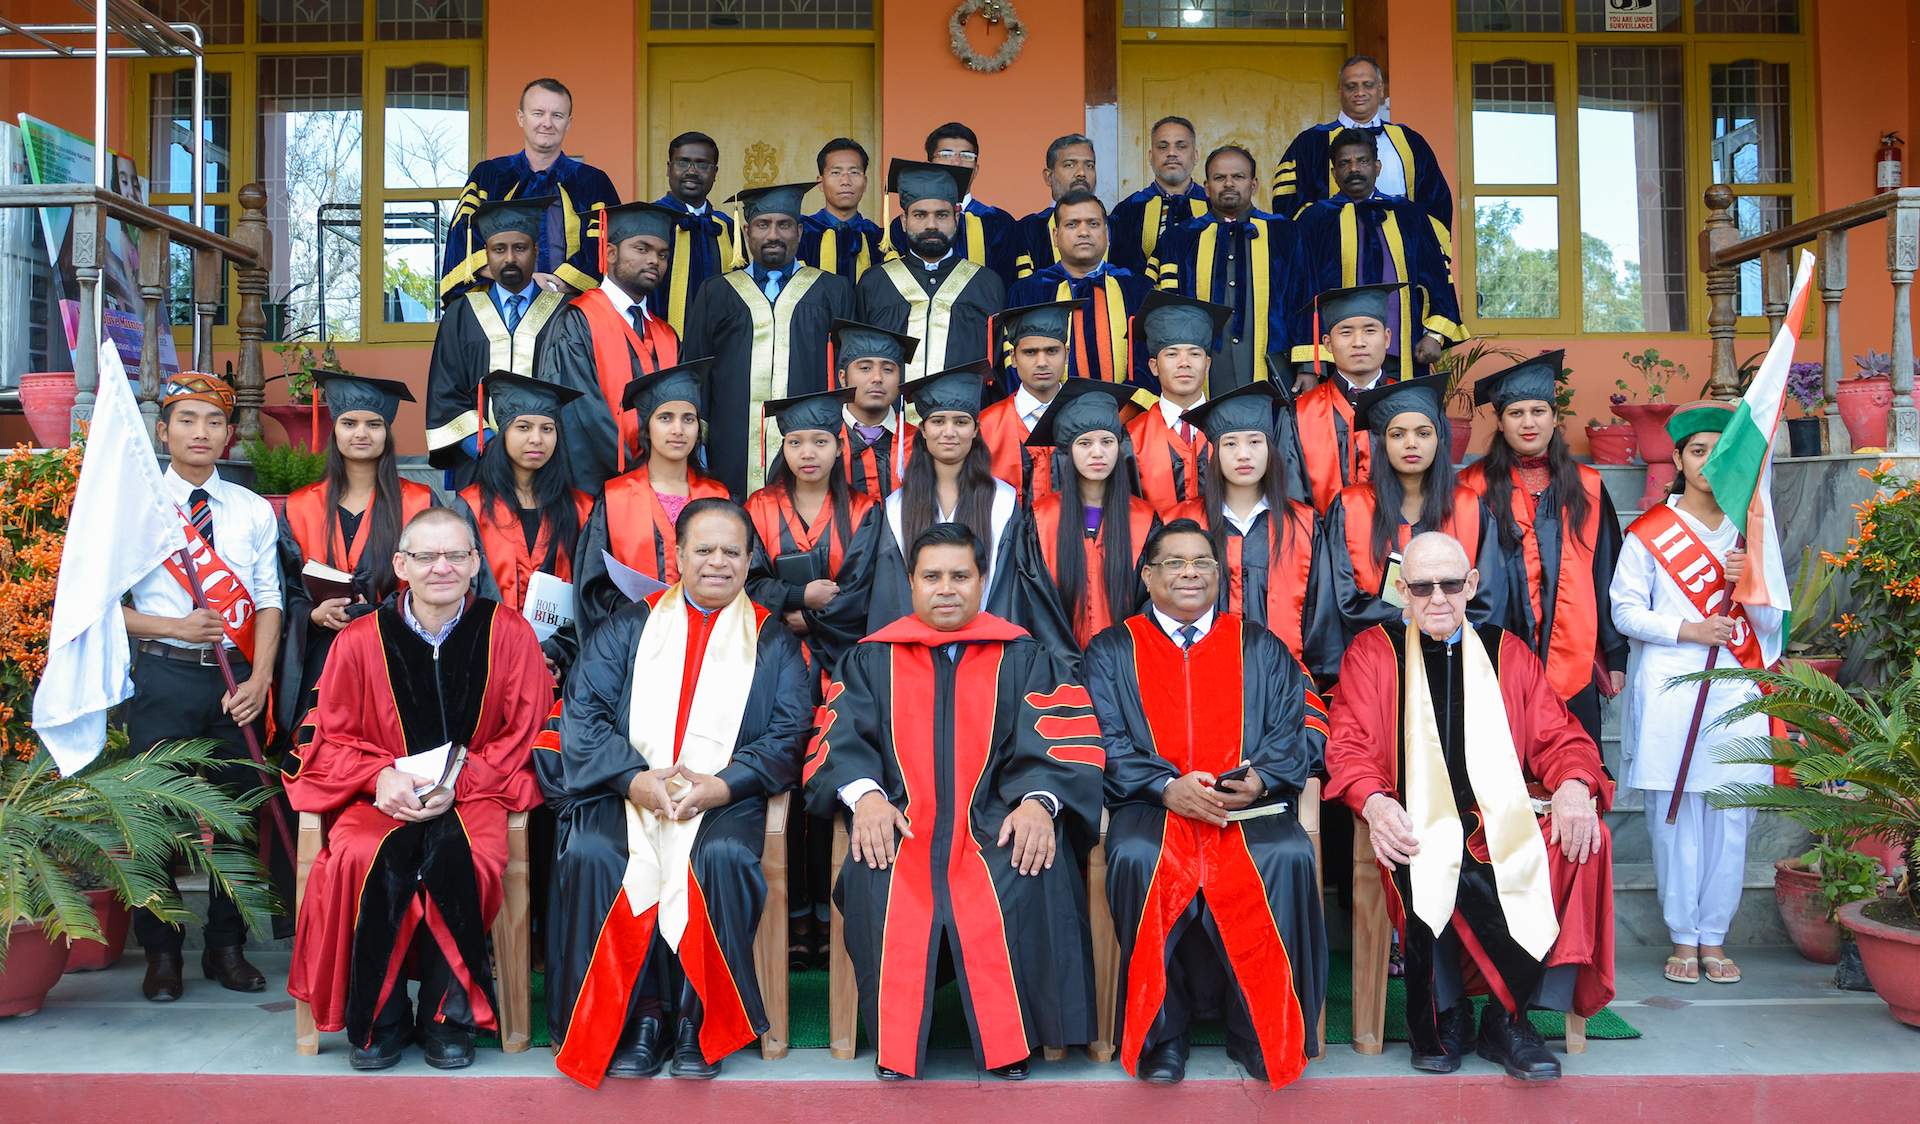 Graduates from Himachal Pradesh Bible Training Center will take the gospel to people in one of India’s least evangelized states.